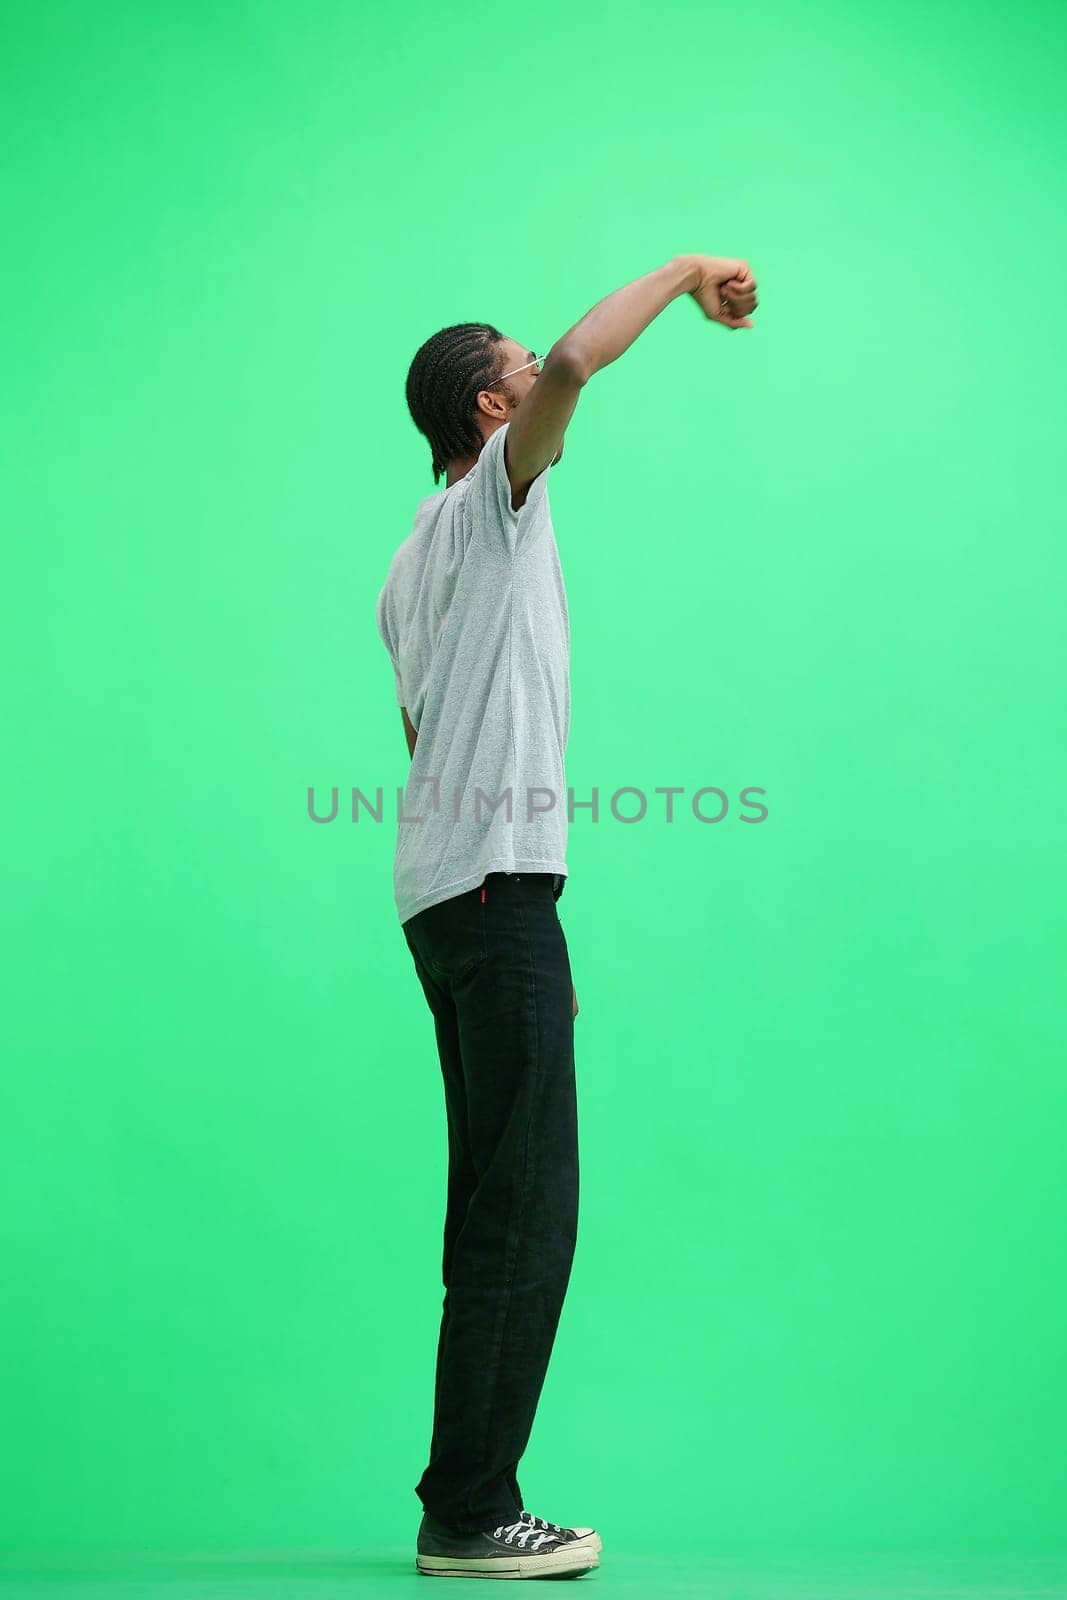 A man in a gray T-shirt, on a green background, in full height, rejoices.